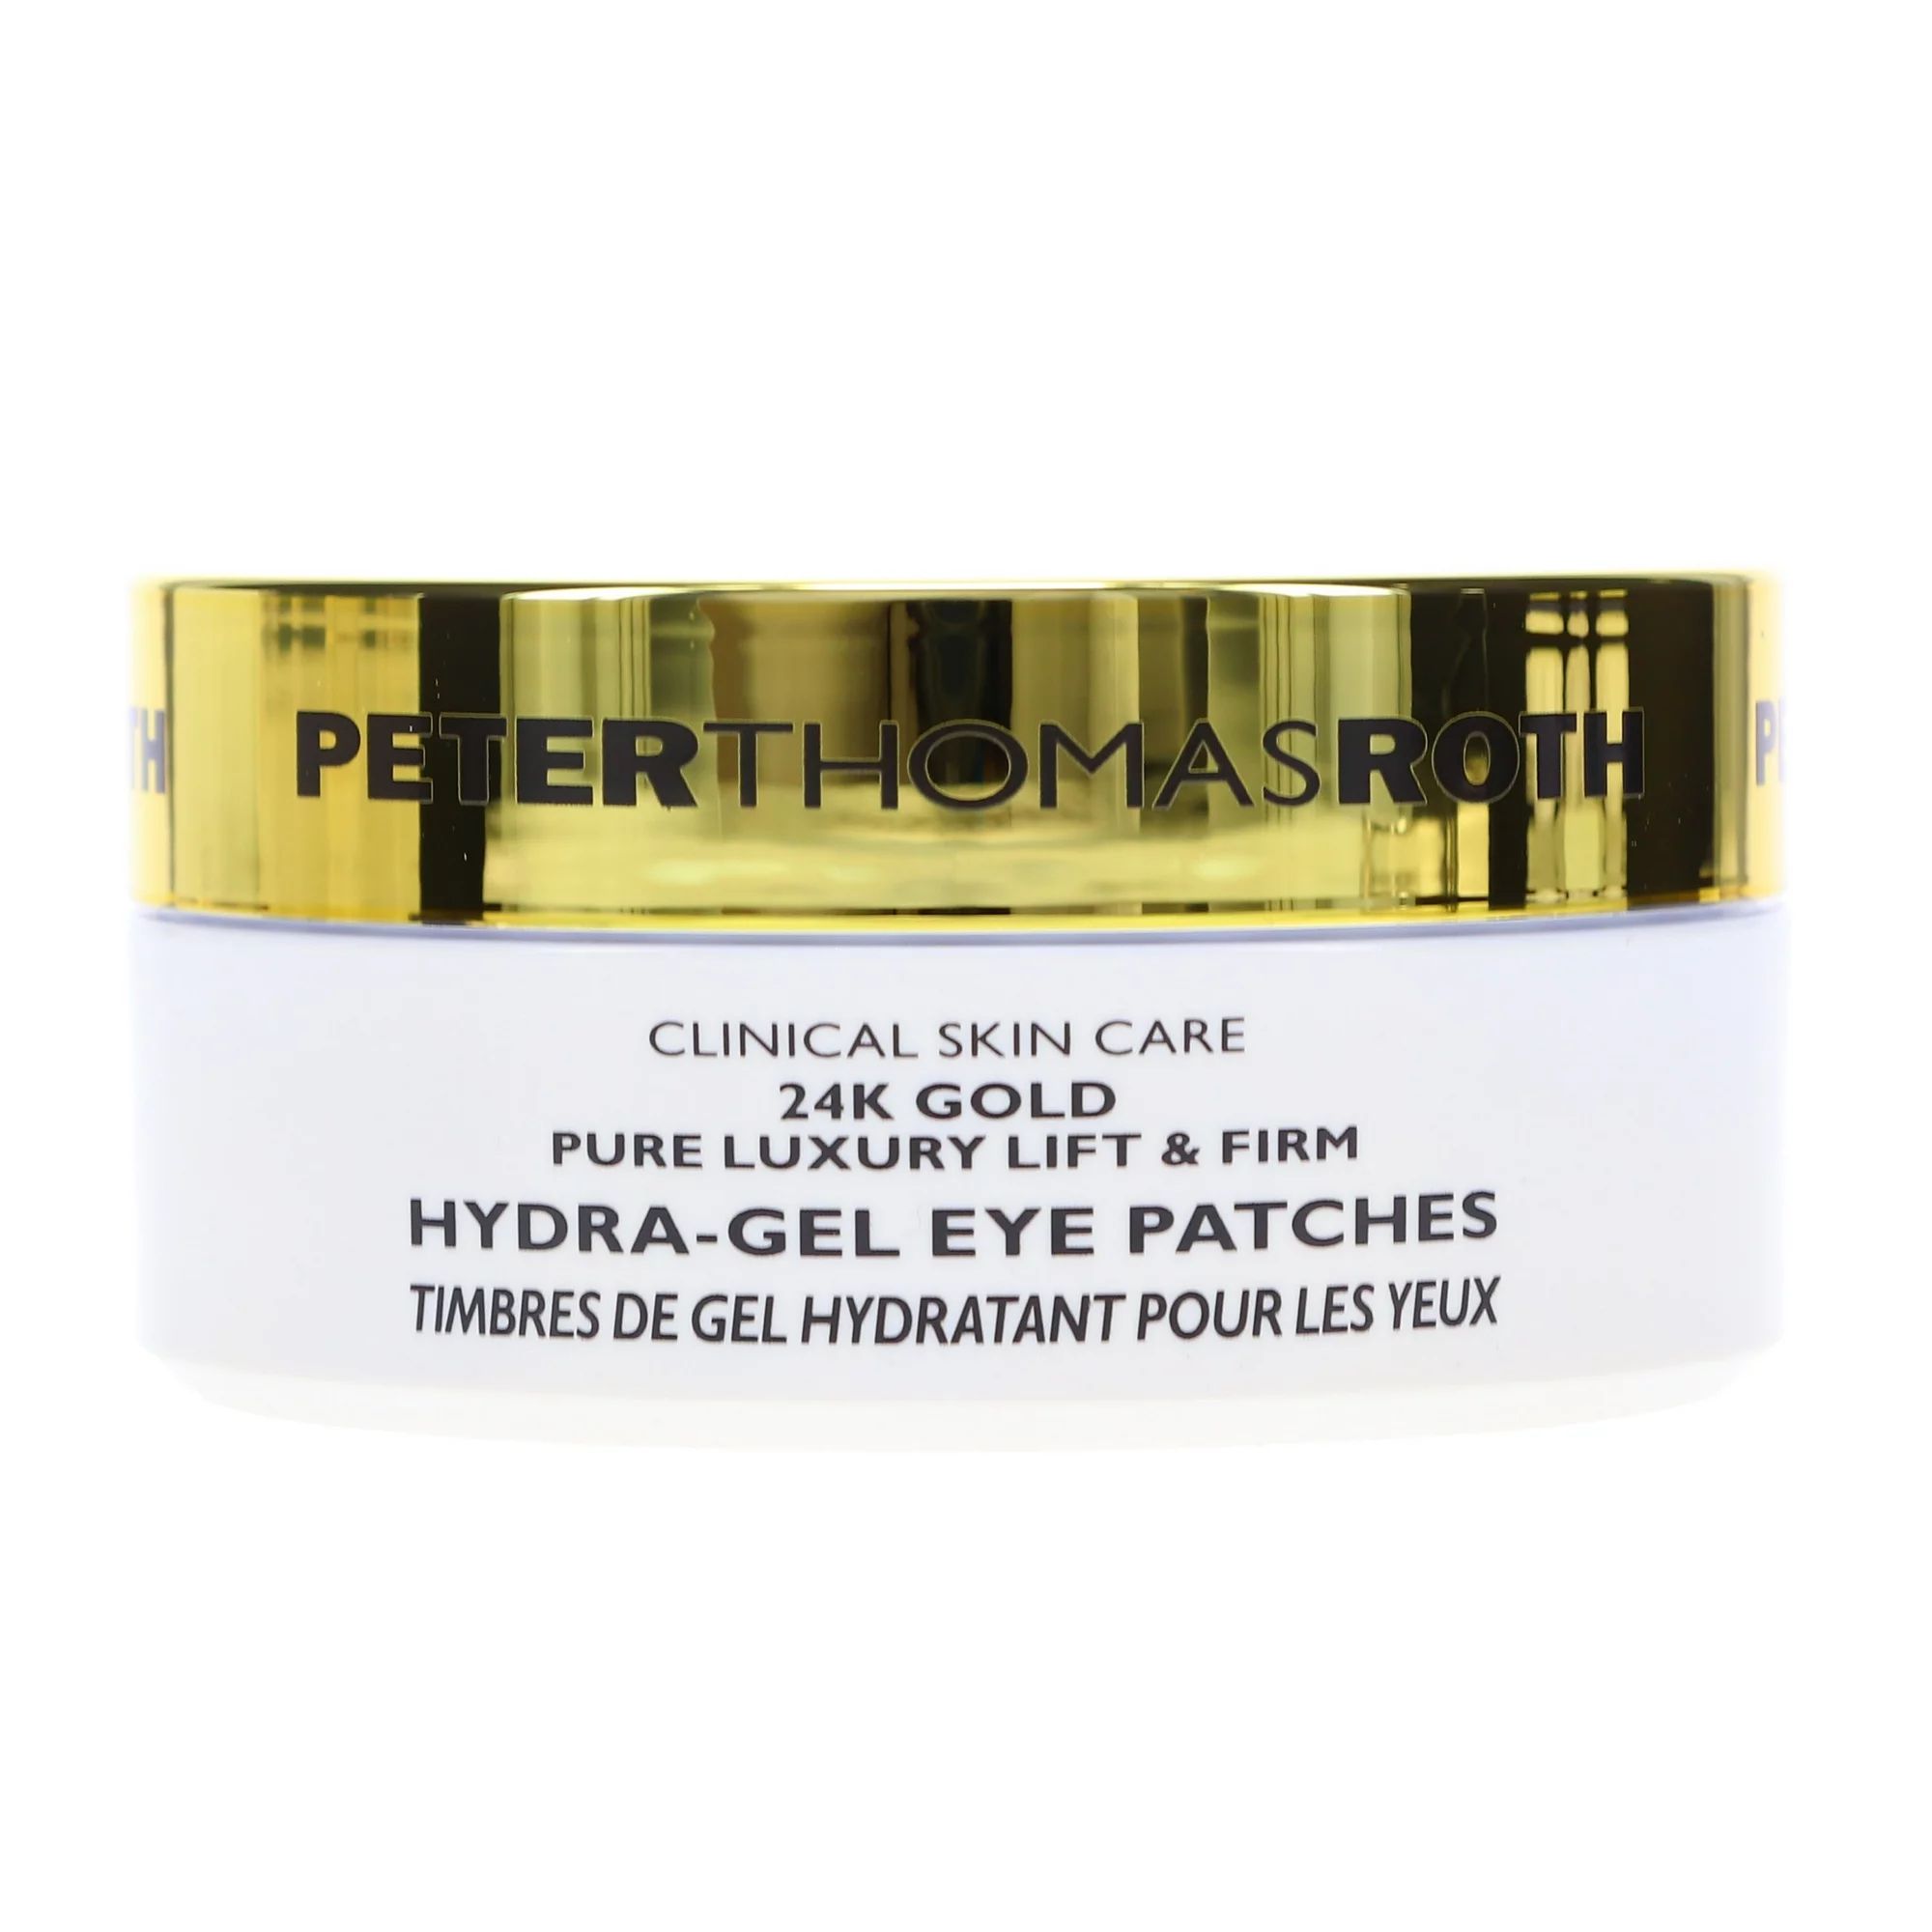 Peter Thomas Roth 24K Gold Pure Luxury Lift & Firm Hydra Gel Eye Patches 60 pc | Walmart (US)